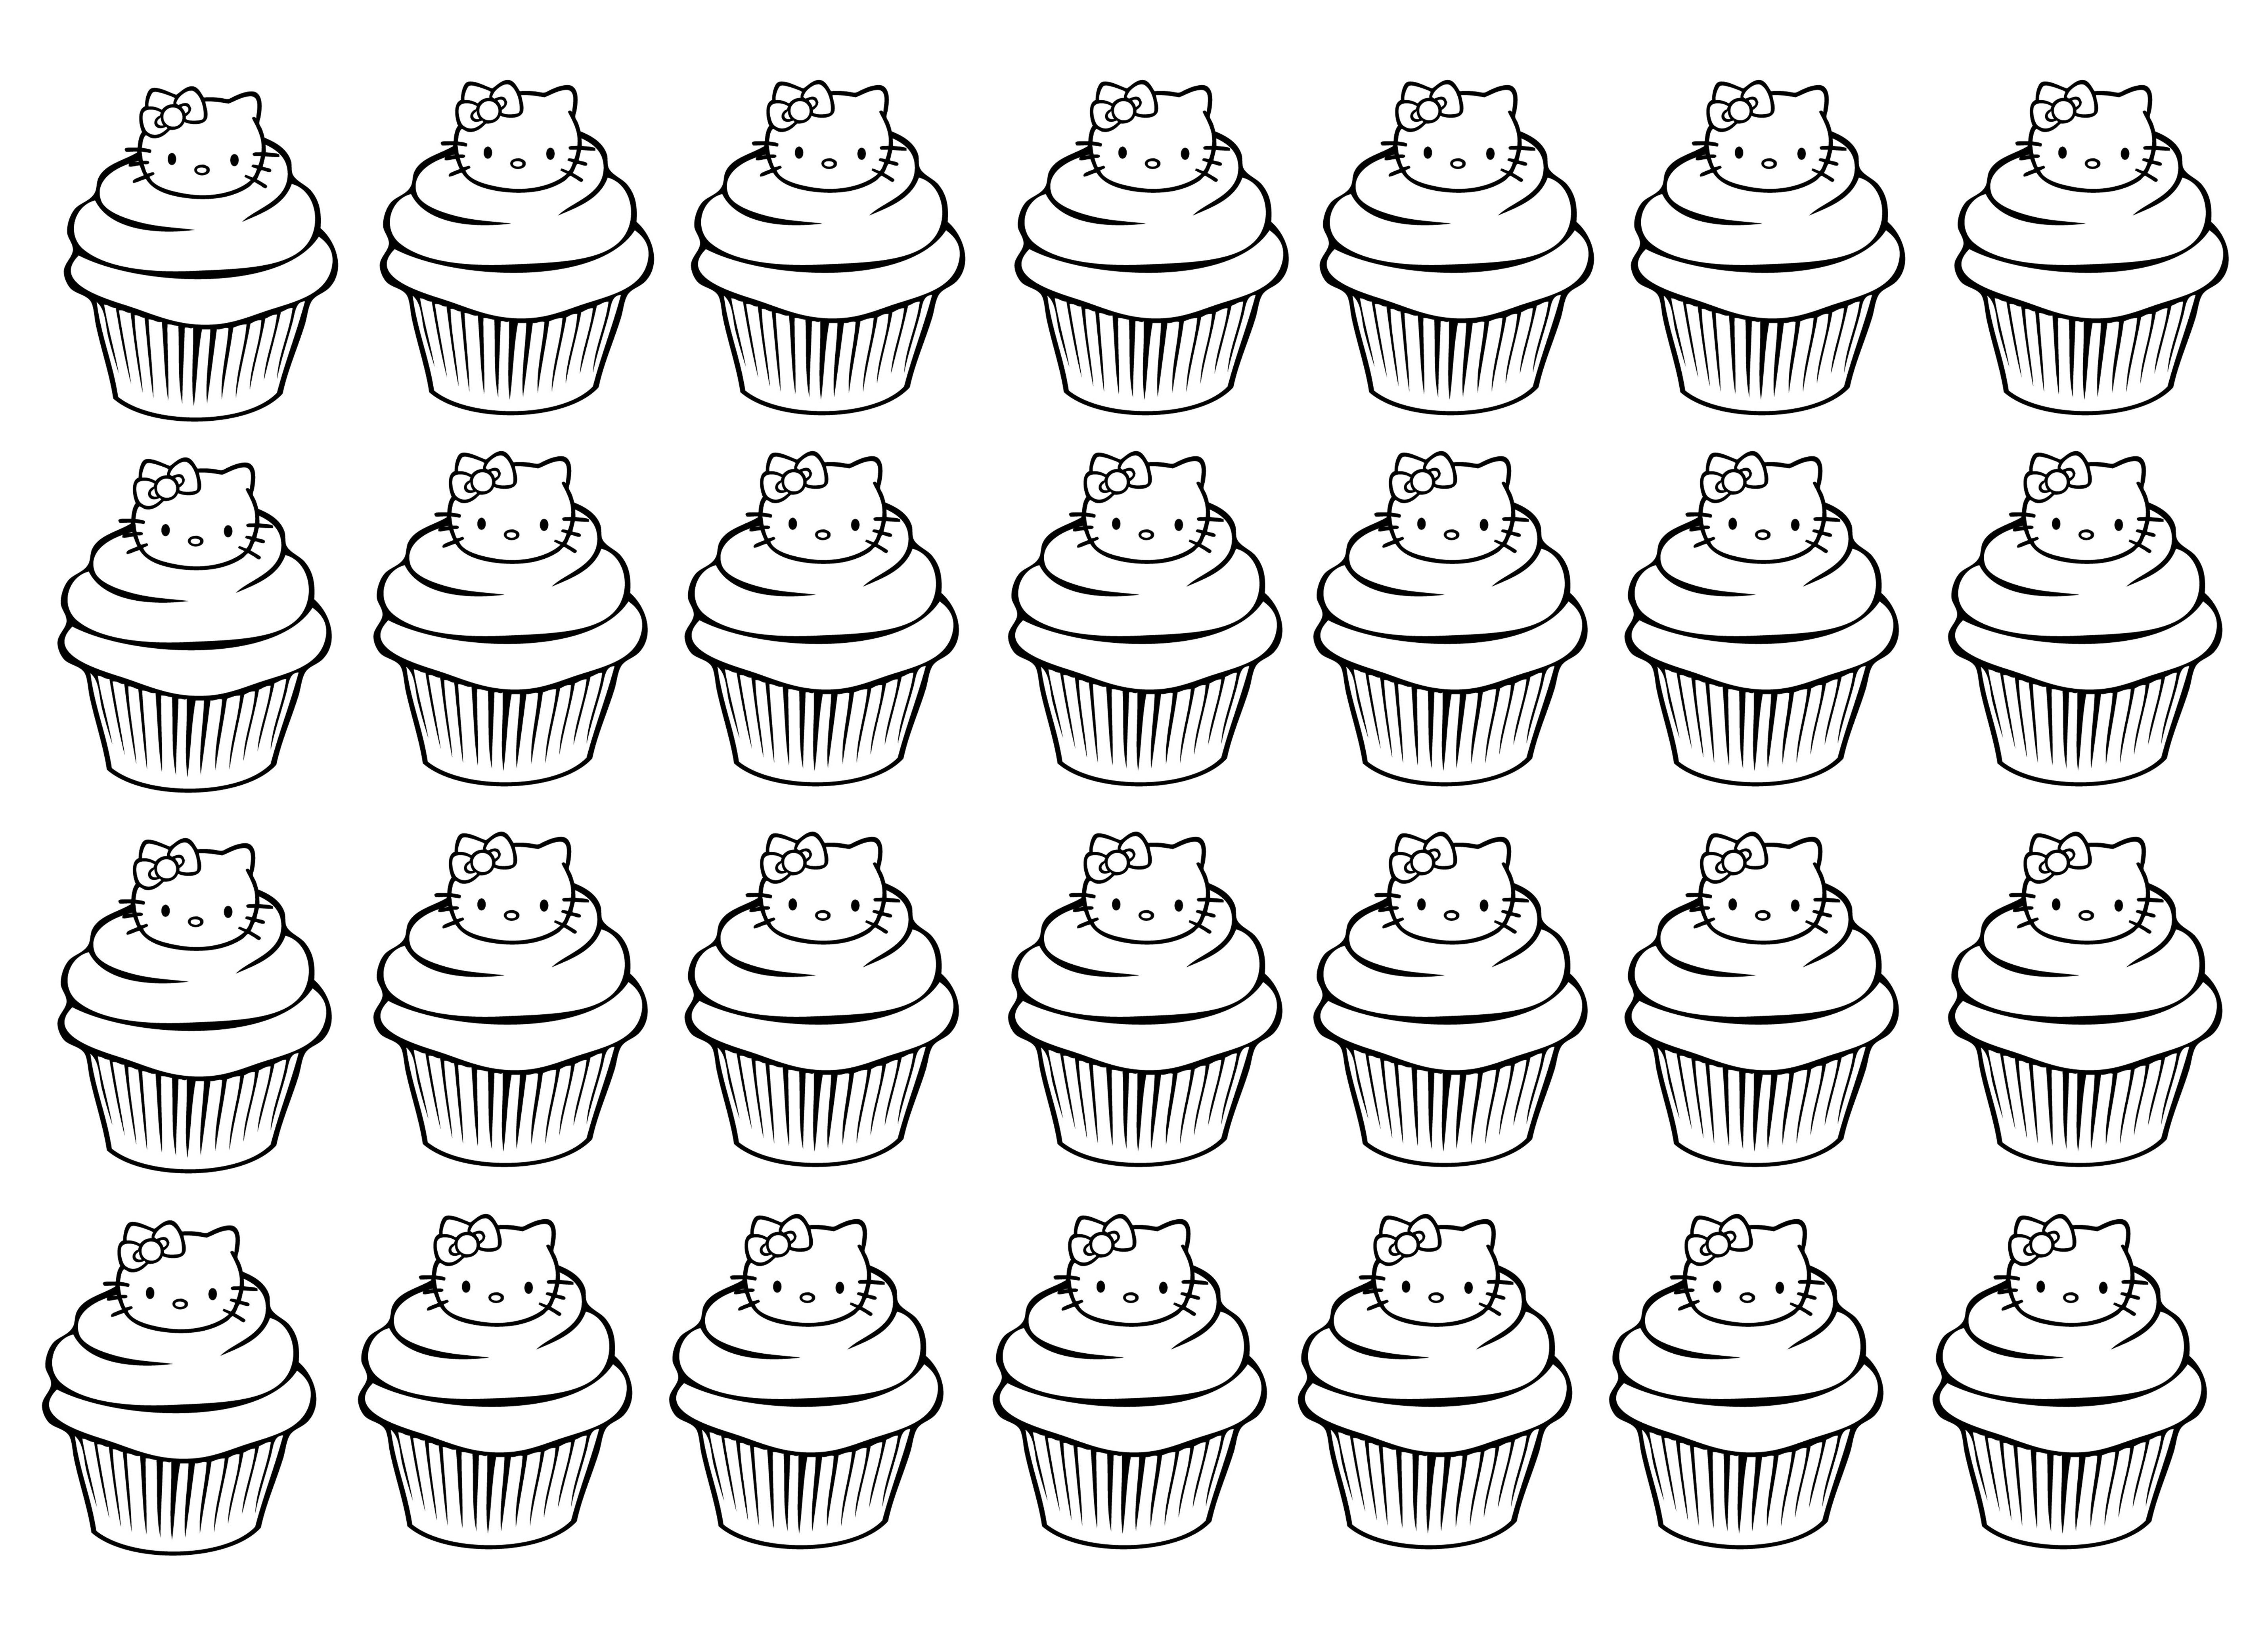 image=cup cakes coloriage cupcakes hello kitty plexe 1